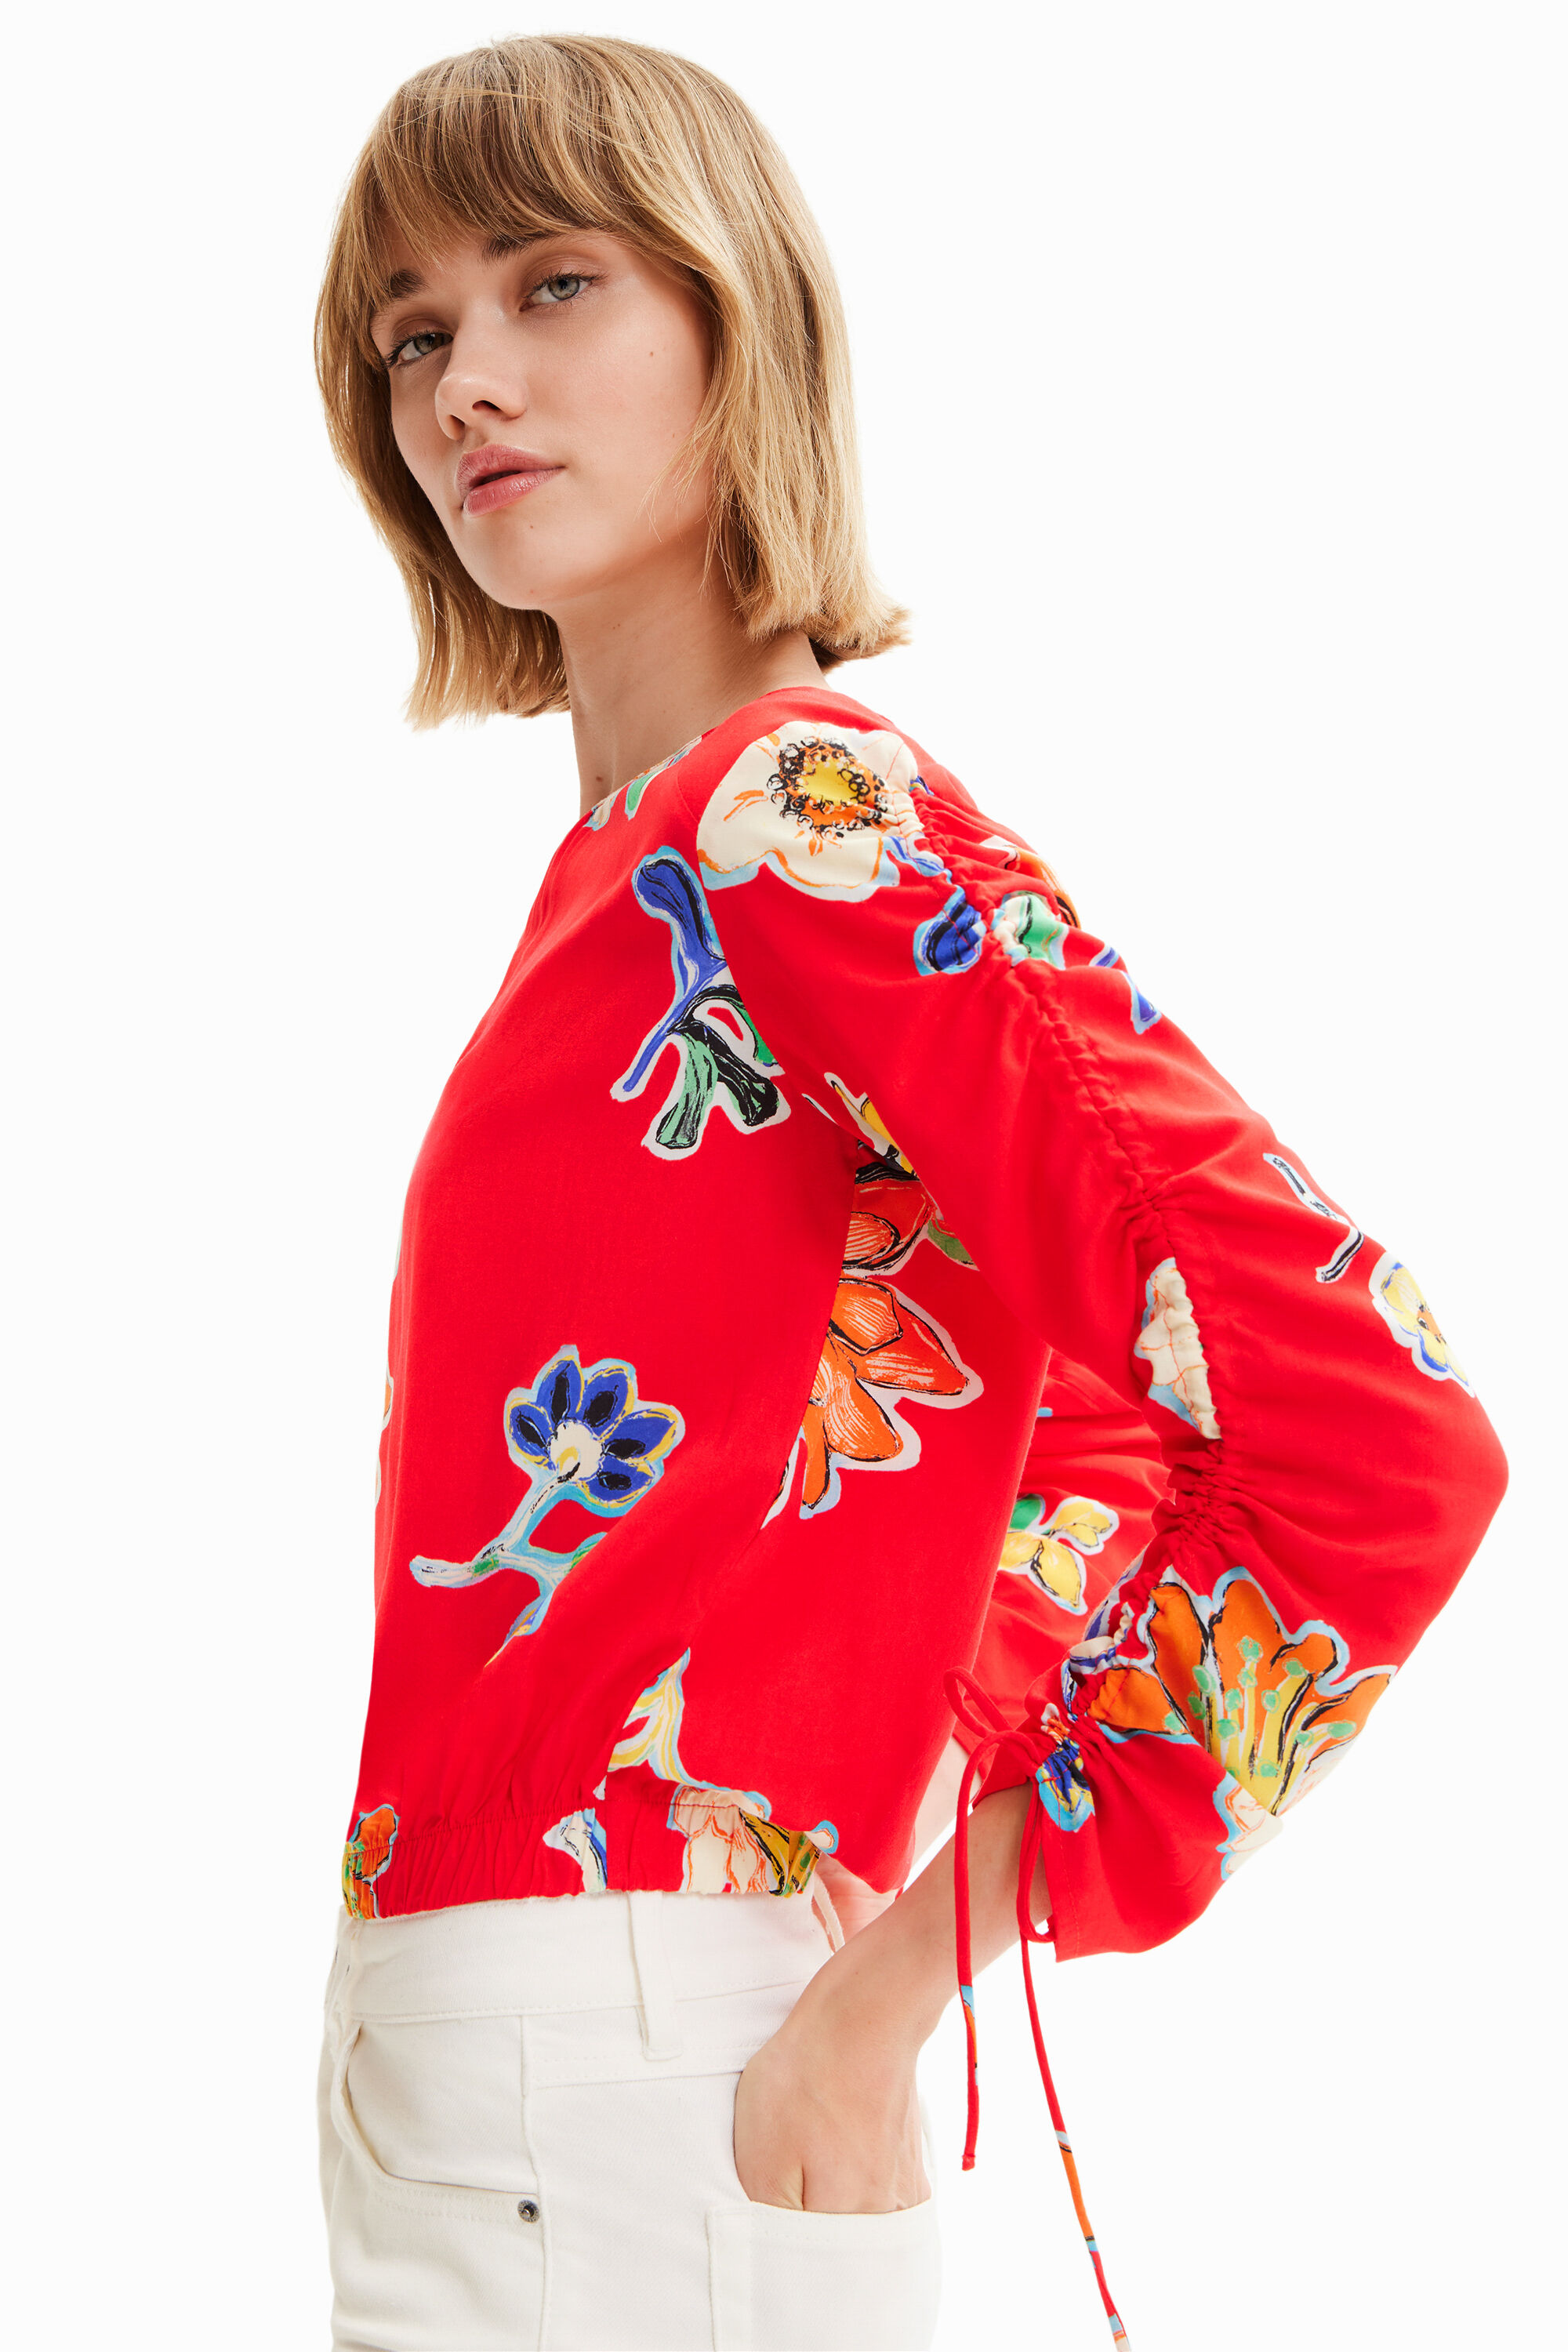 Desigual LANDI short gathered viscose blouse Summer 2023 collection now on sale at Angel in Vancouver Canada